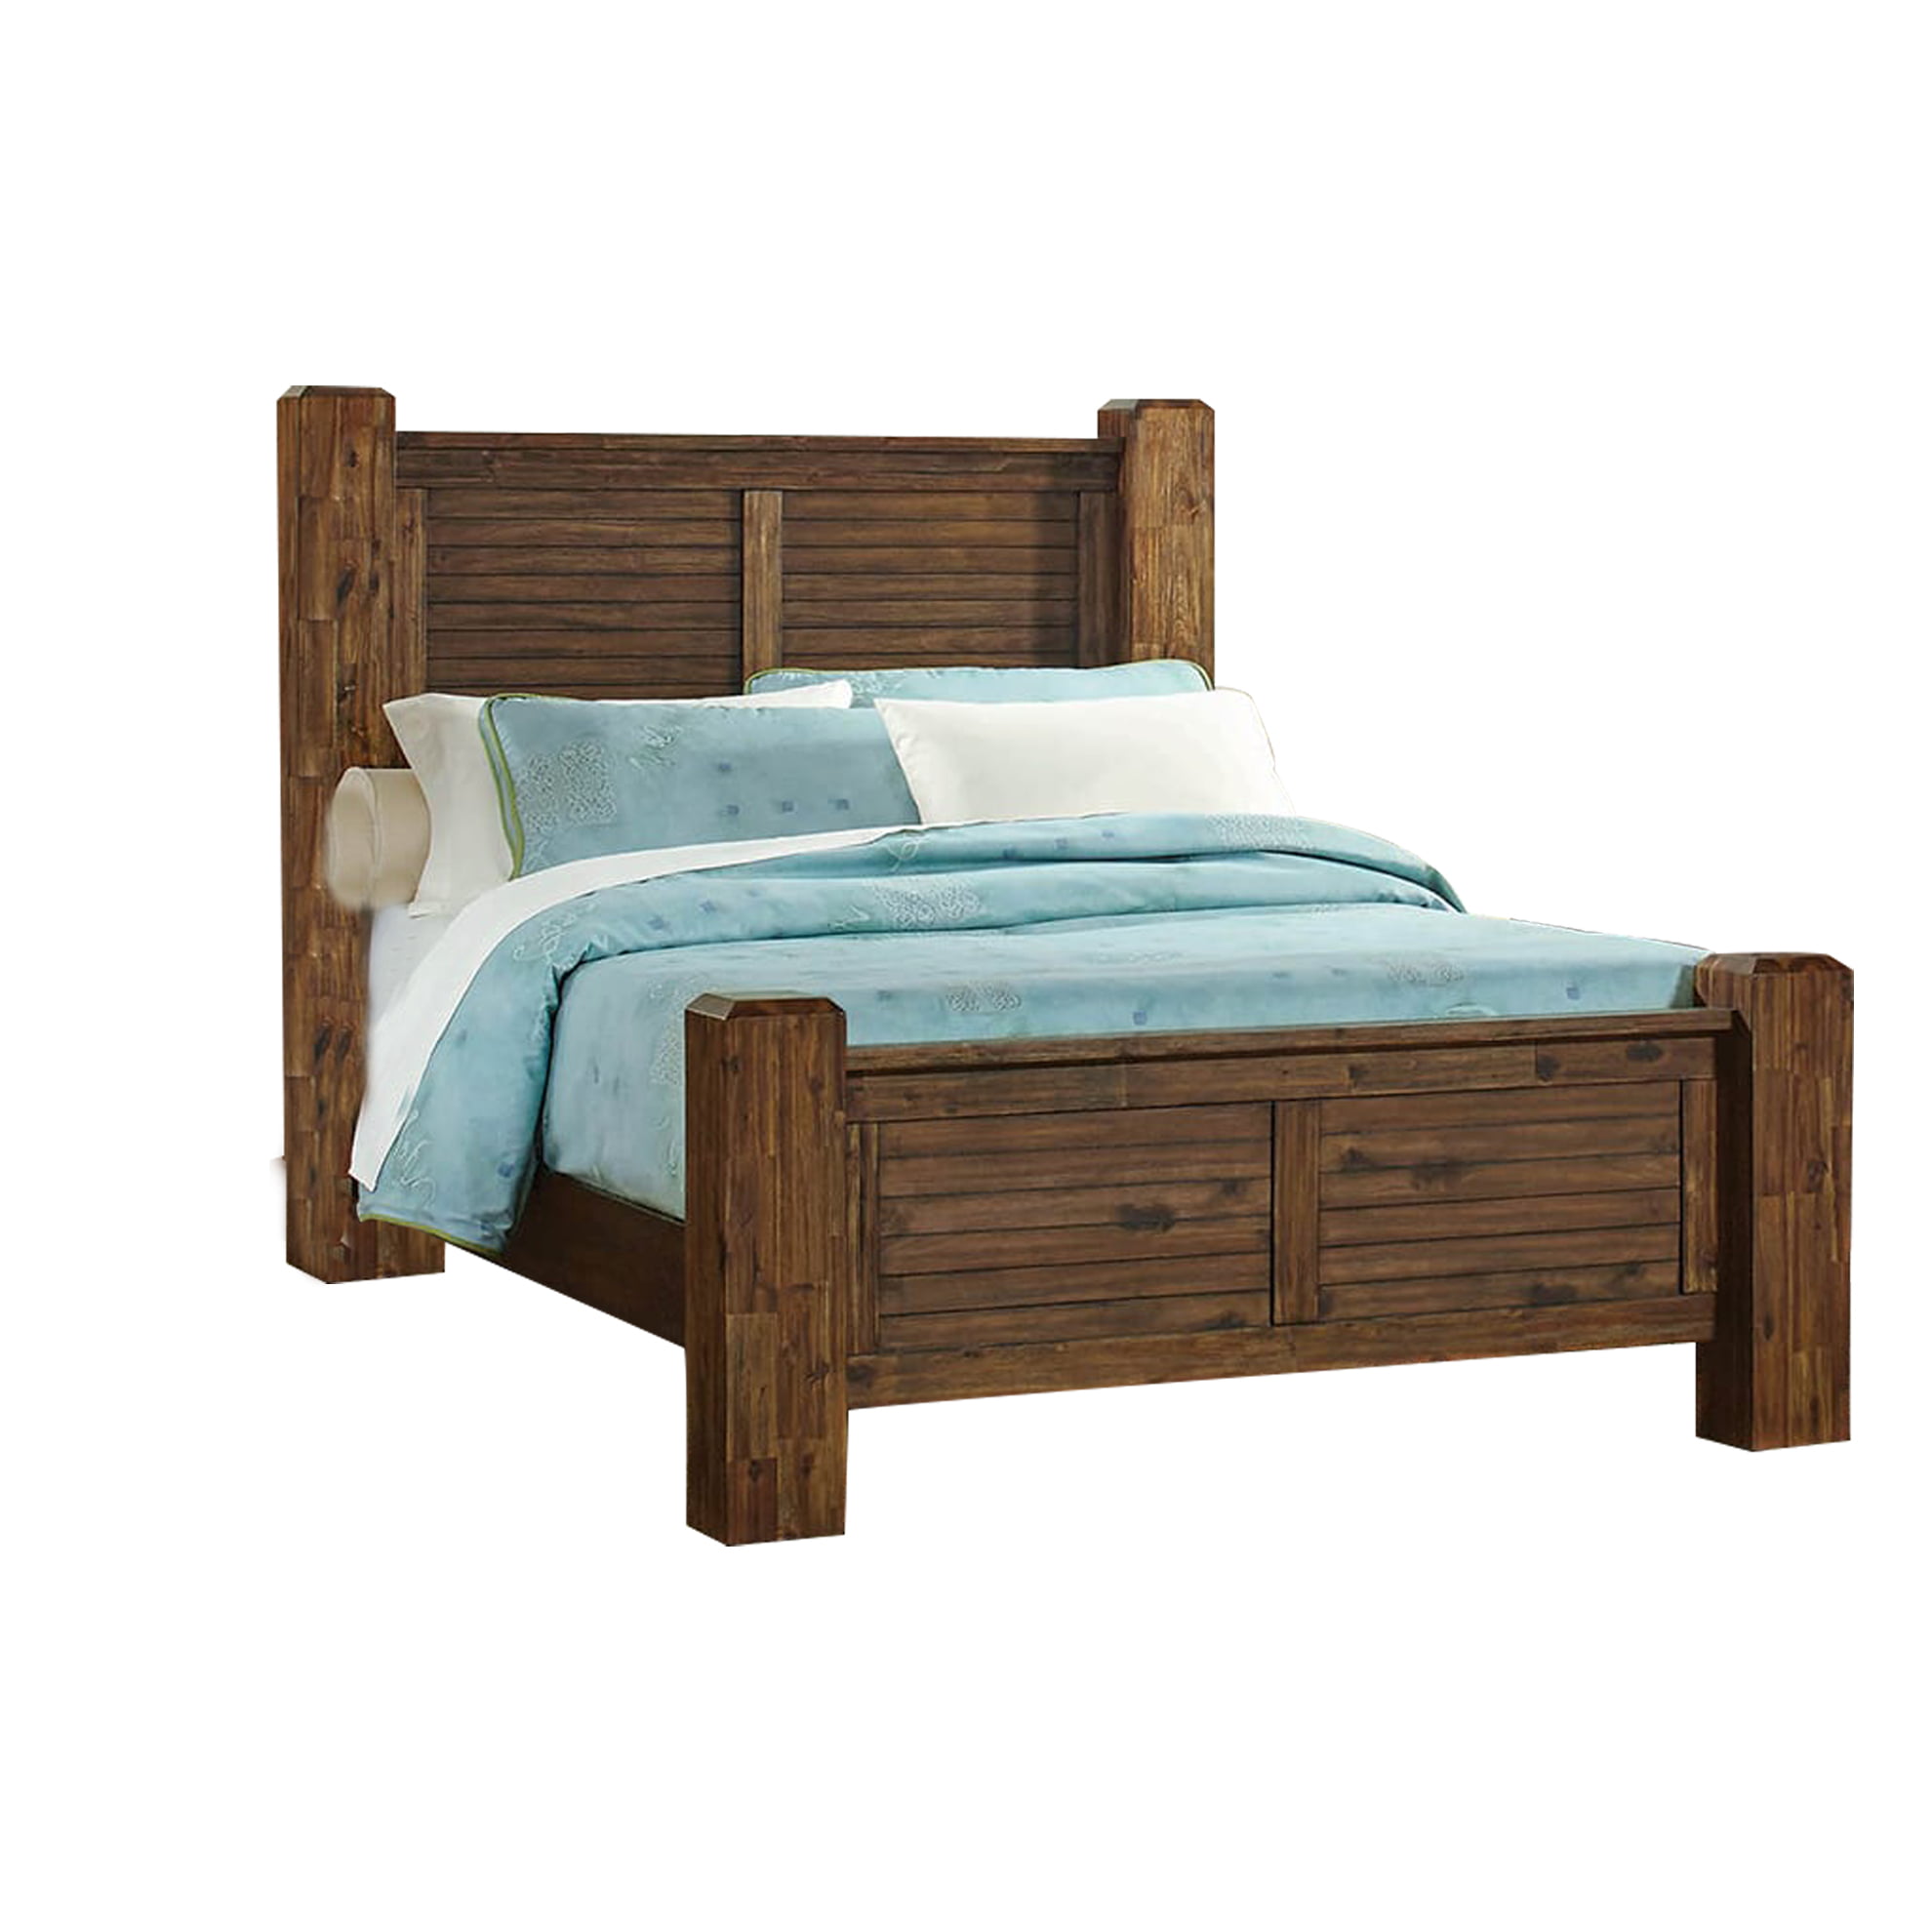 Wooden Queen Size Bed with Louvered Headboard and Footboard, Brown